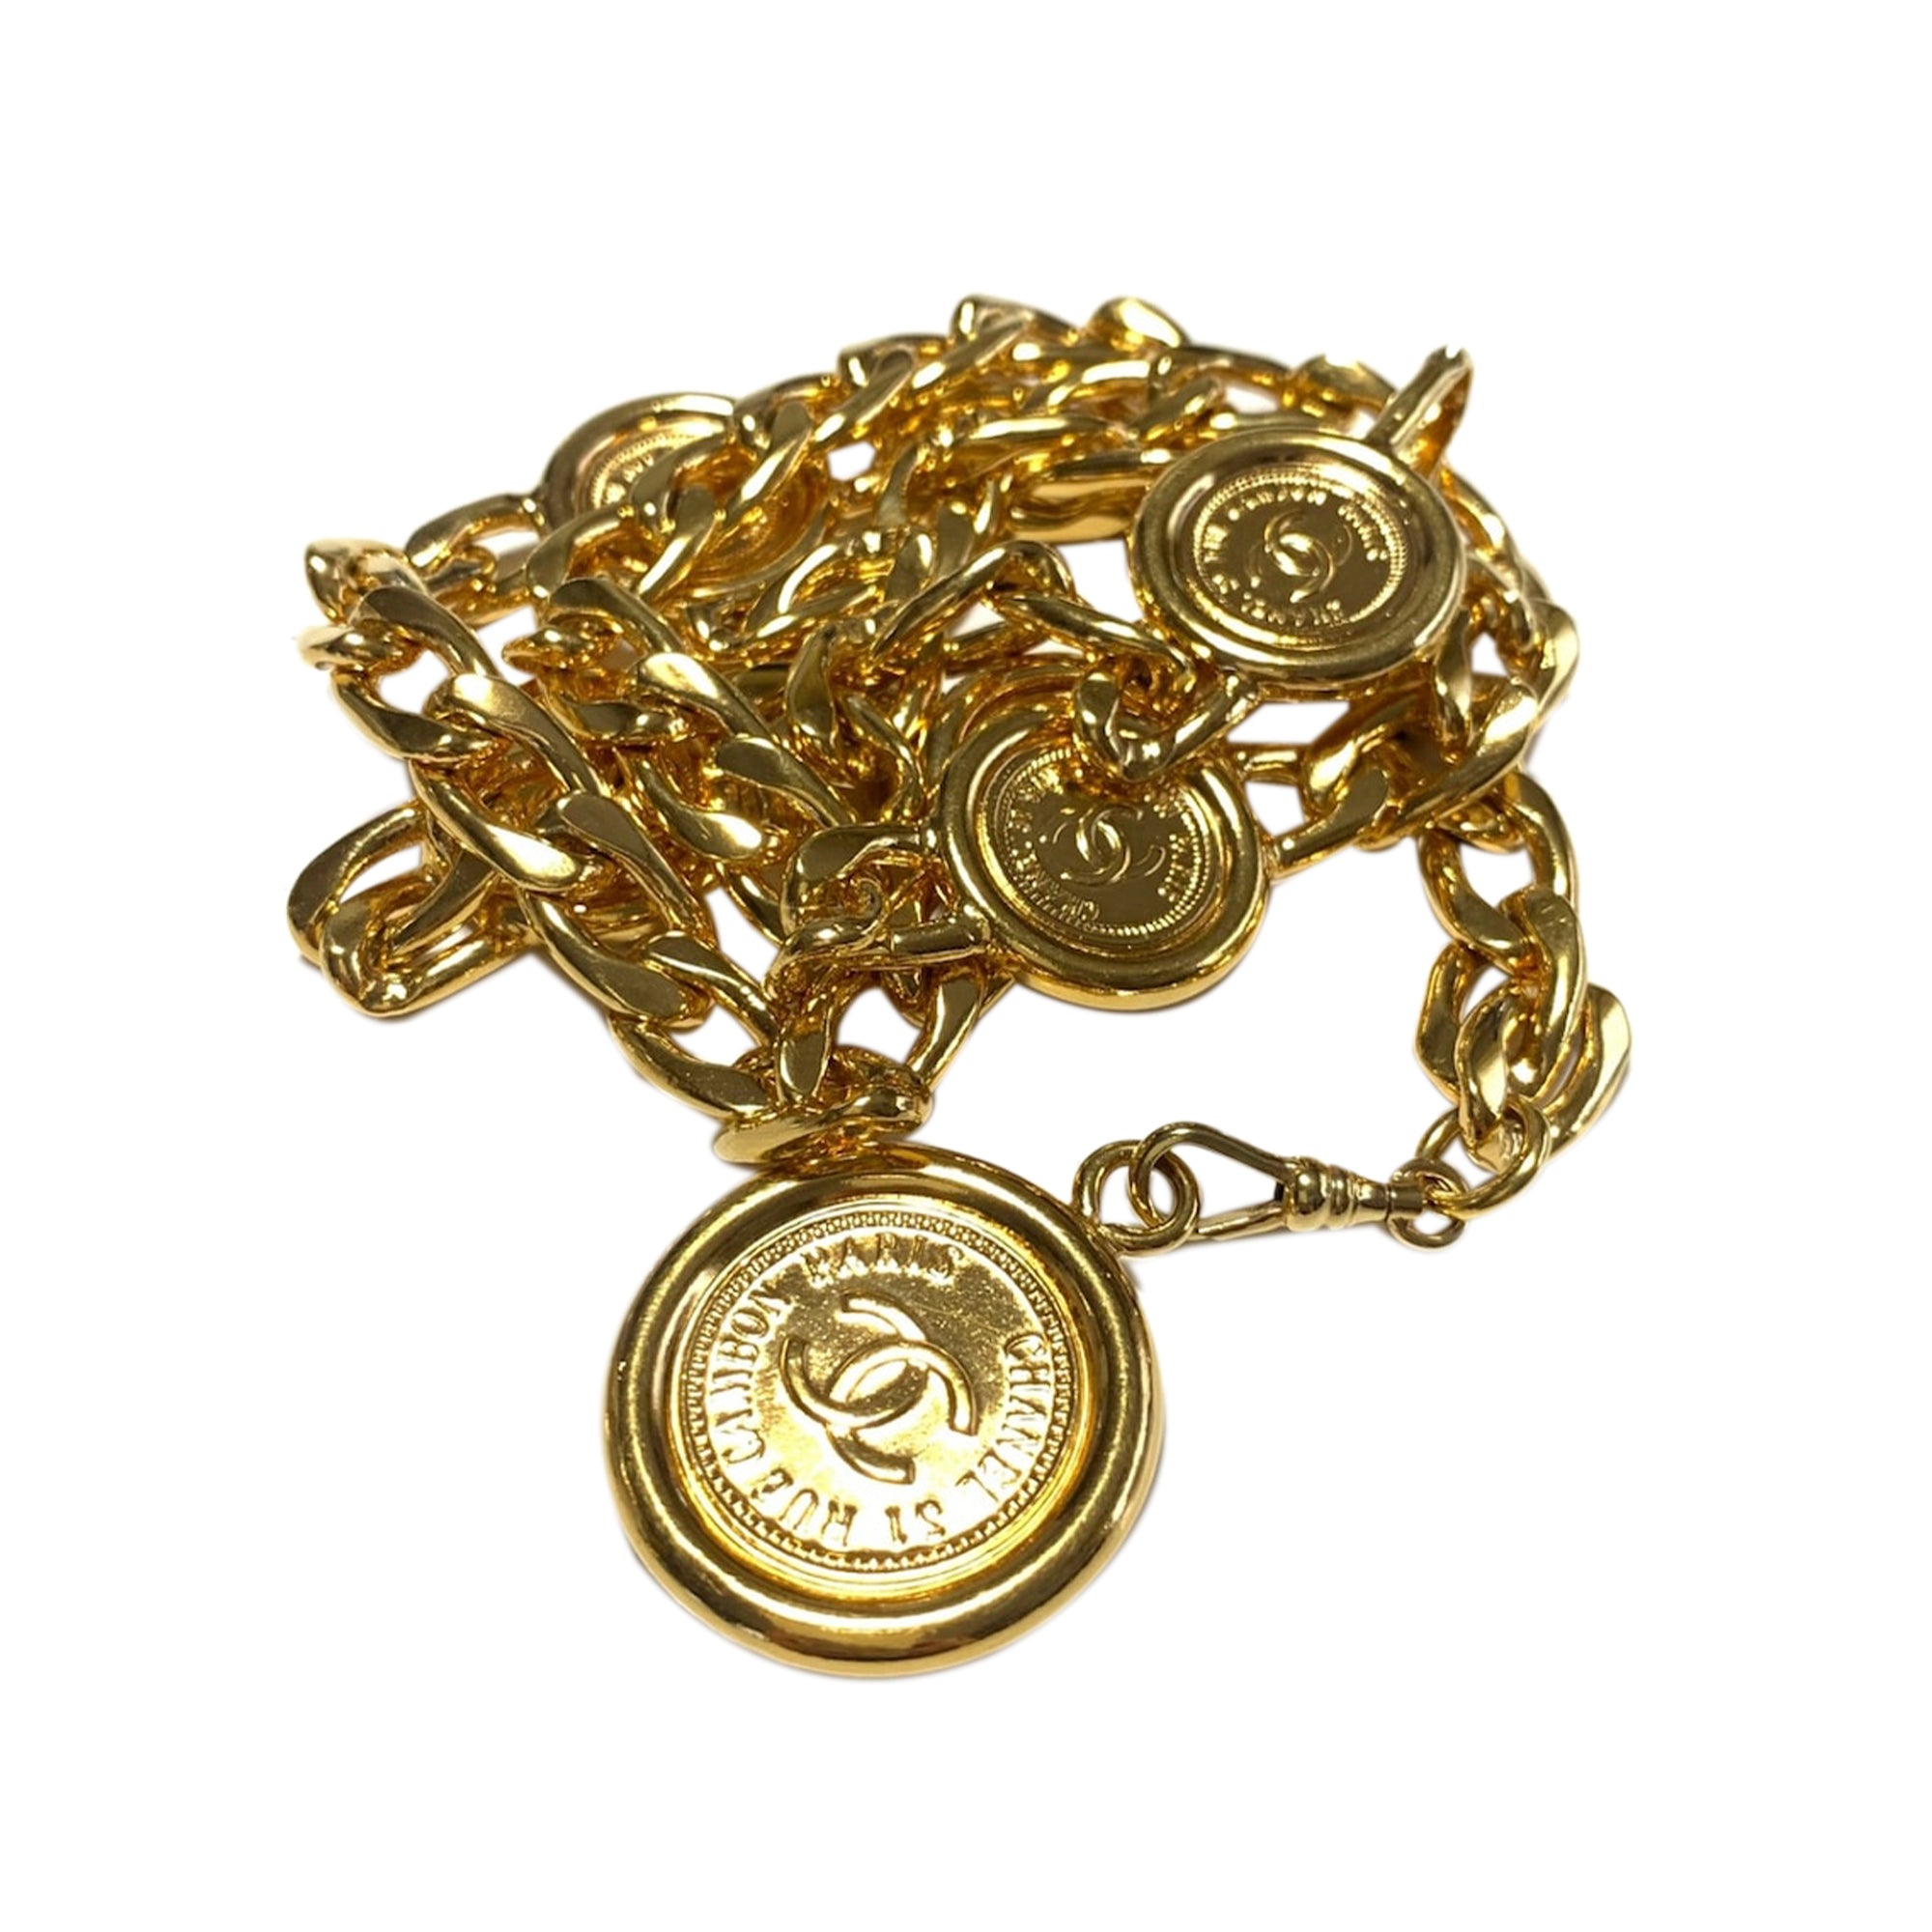 Chanel Vintage Crown and Coco Chanel Medallion Chain Belt